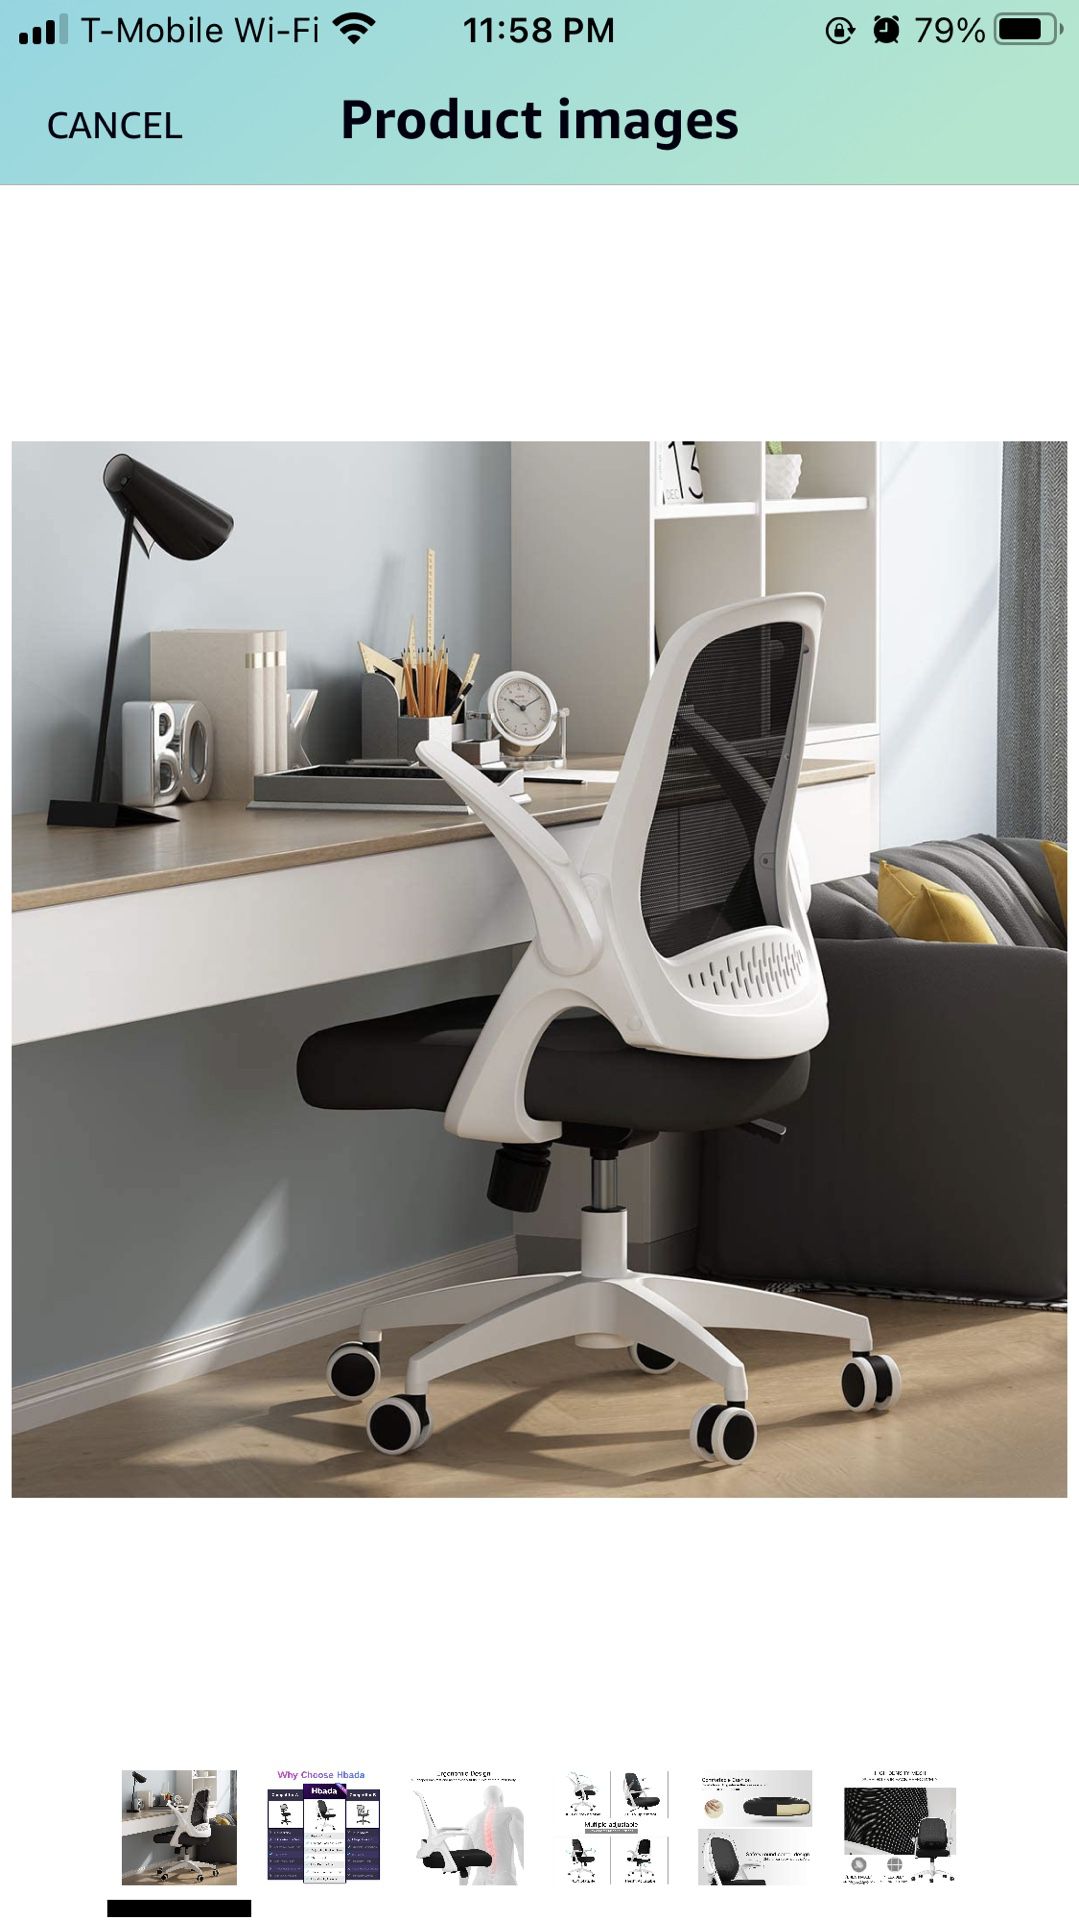 New— Hbada Office Task Desk Chair Swivel Home Comfort Chairs with Flip-up Arms and Adjustable Height, White